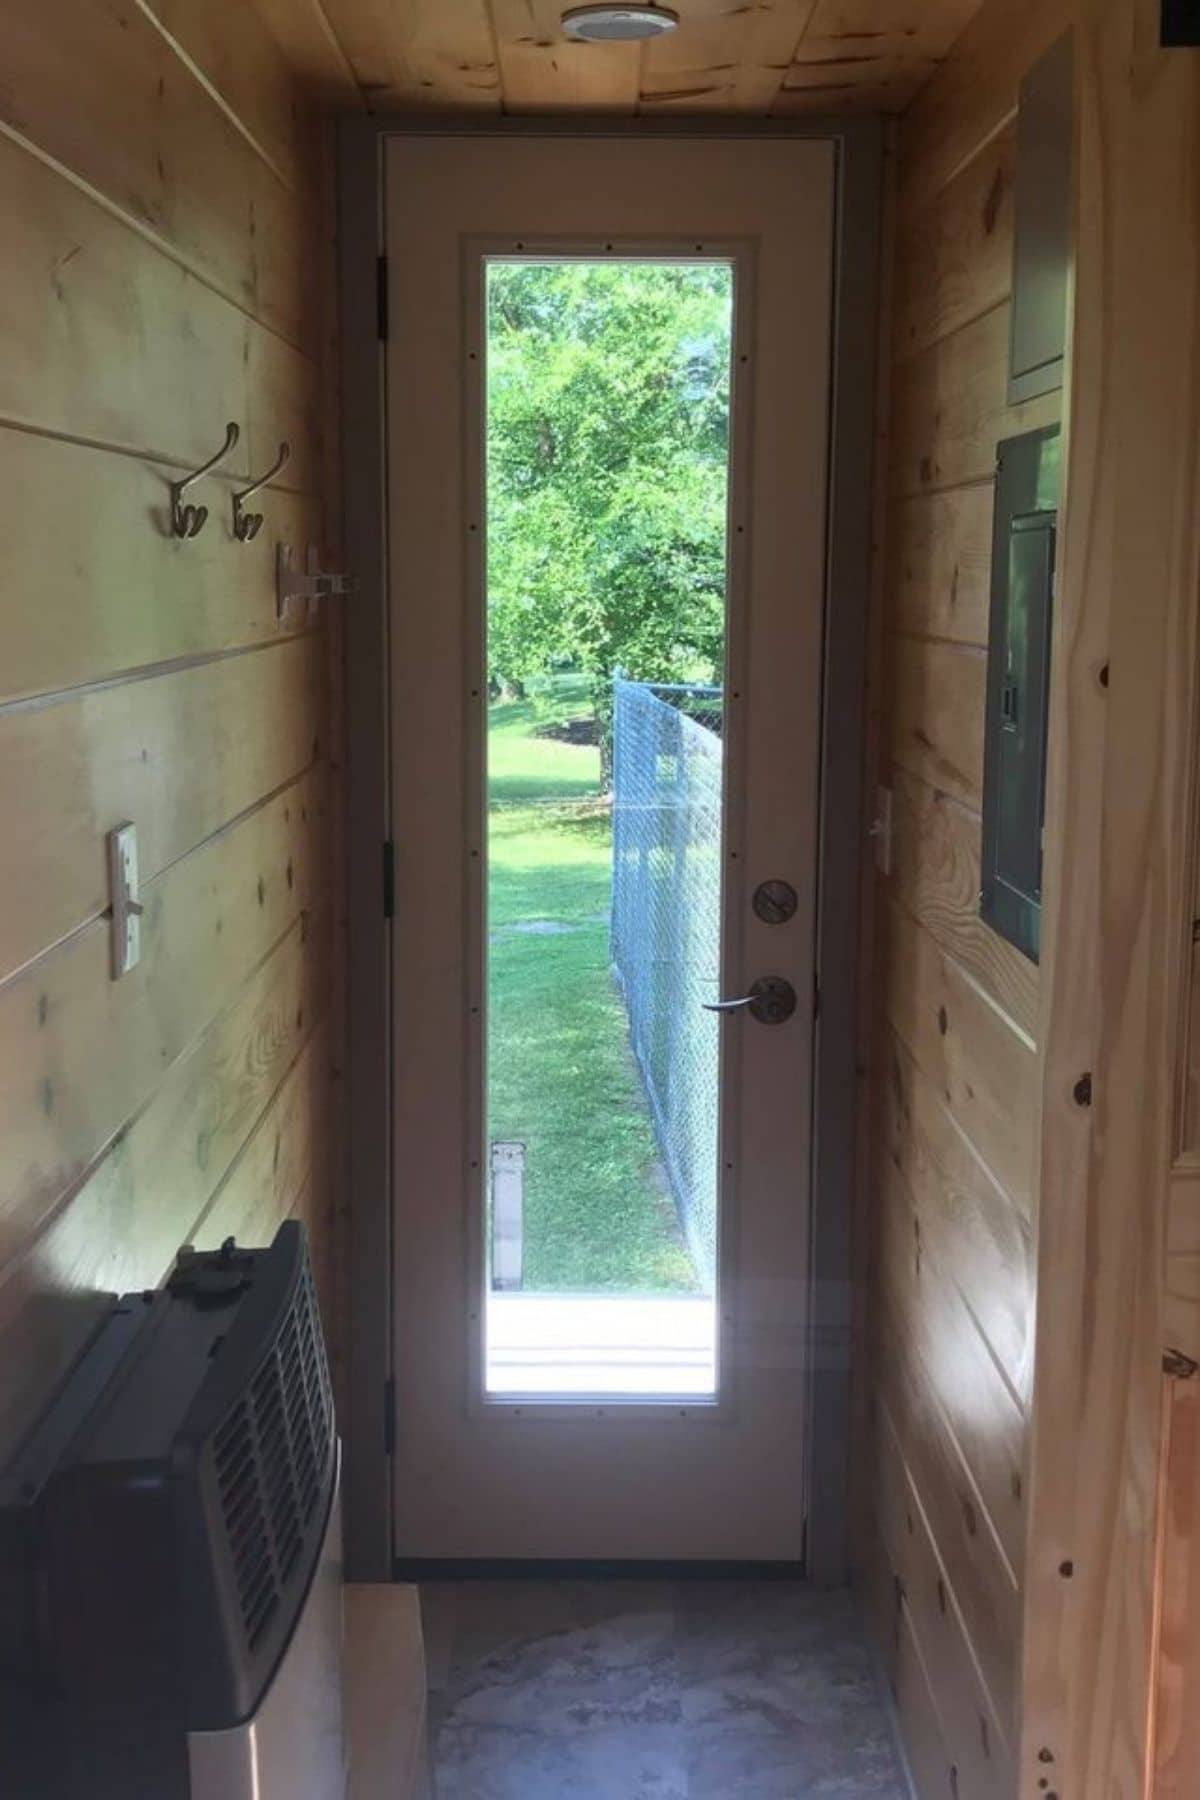 Door with glass panel in entry to tiny home